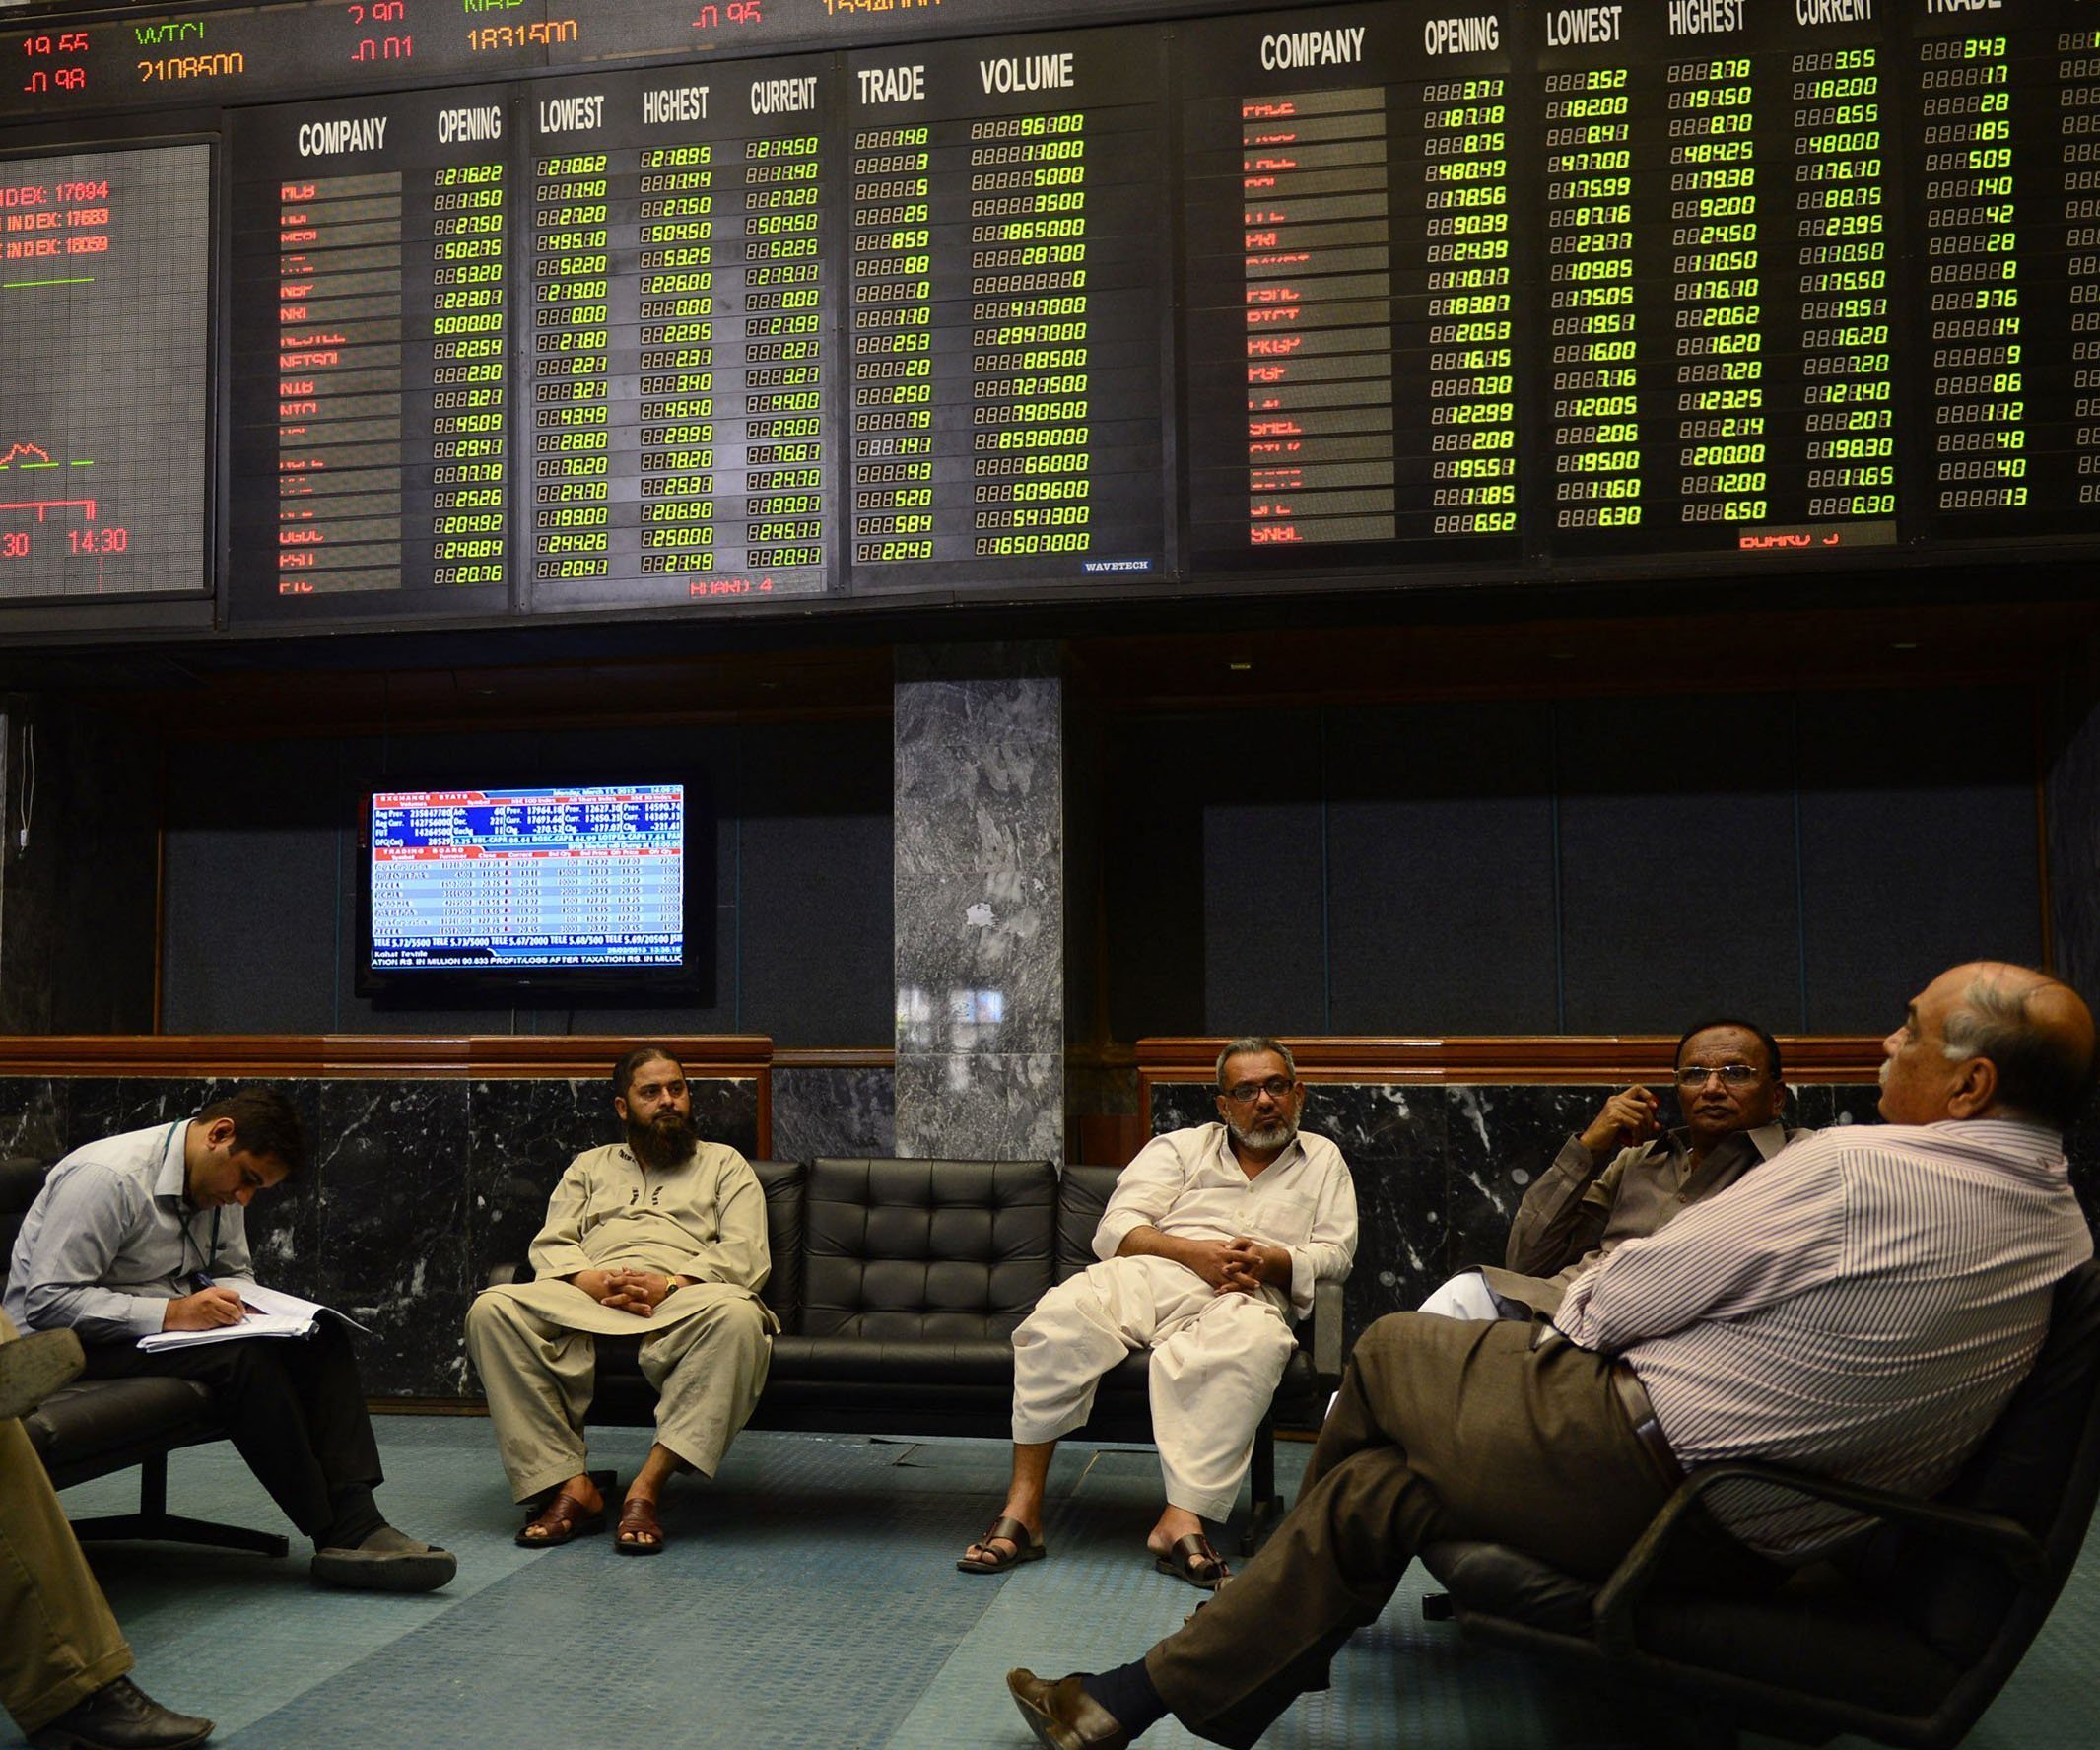 benchmark index decreases 1 37 to settle at 38 037 68 photo afp